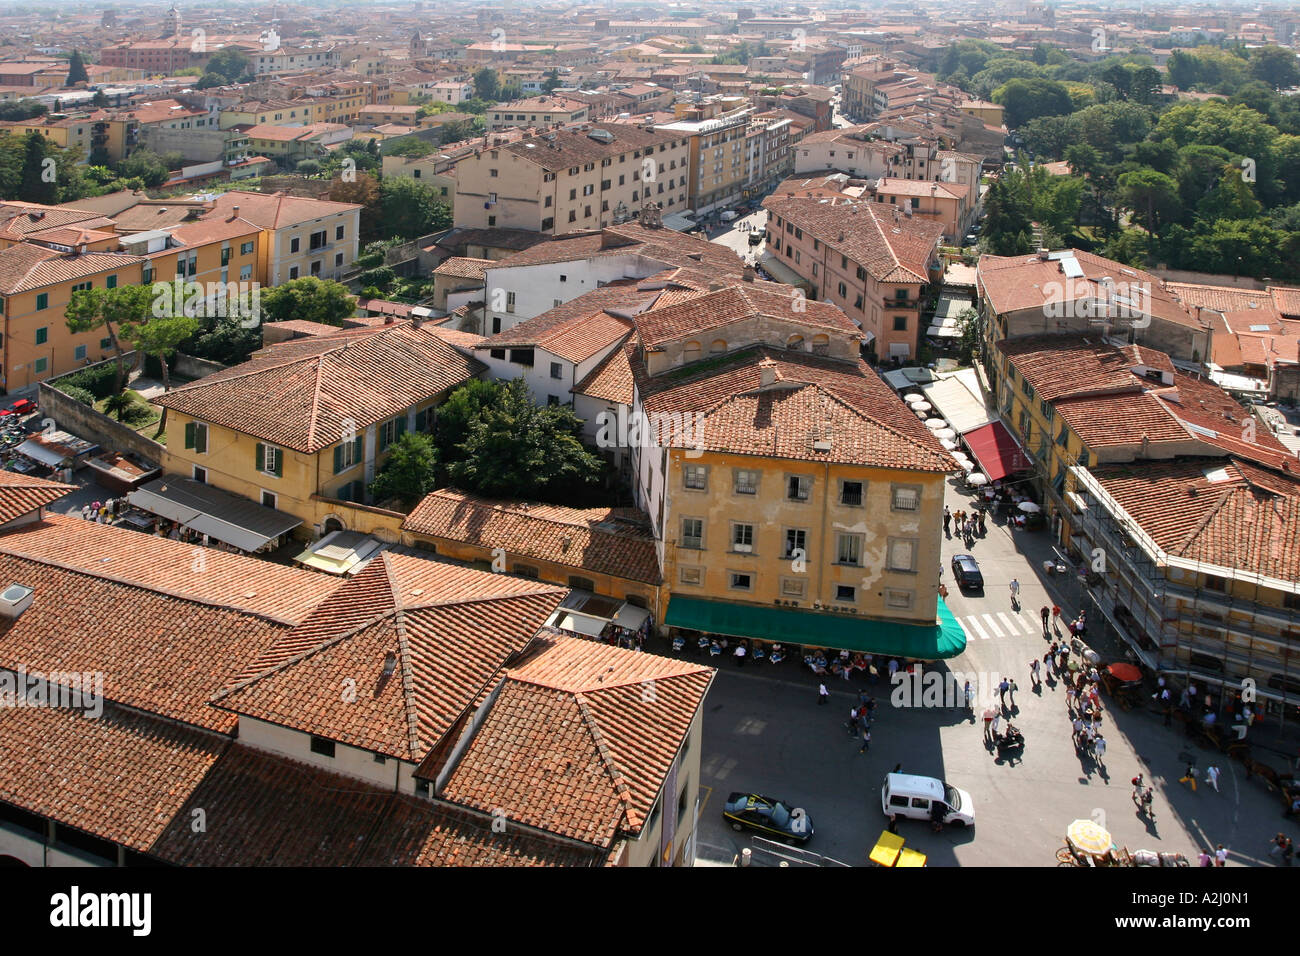 View of the city of Pisa, Western Tuscany, from the Leaning Tower of Pisa, Italy Stock Photo